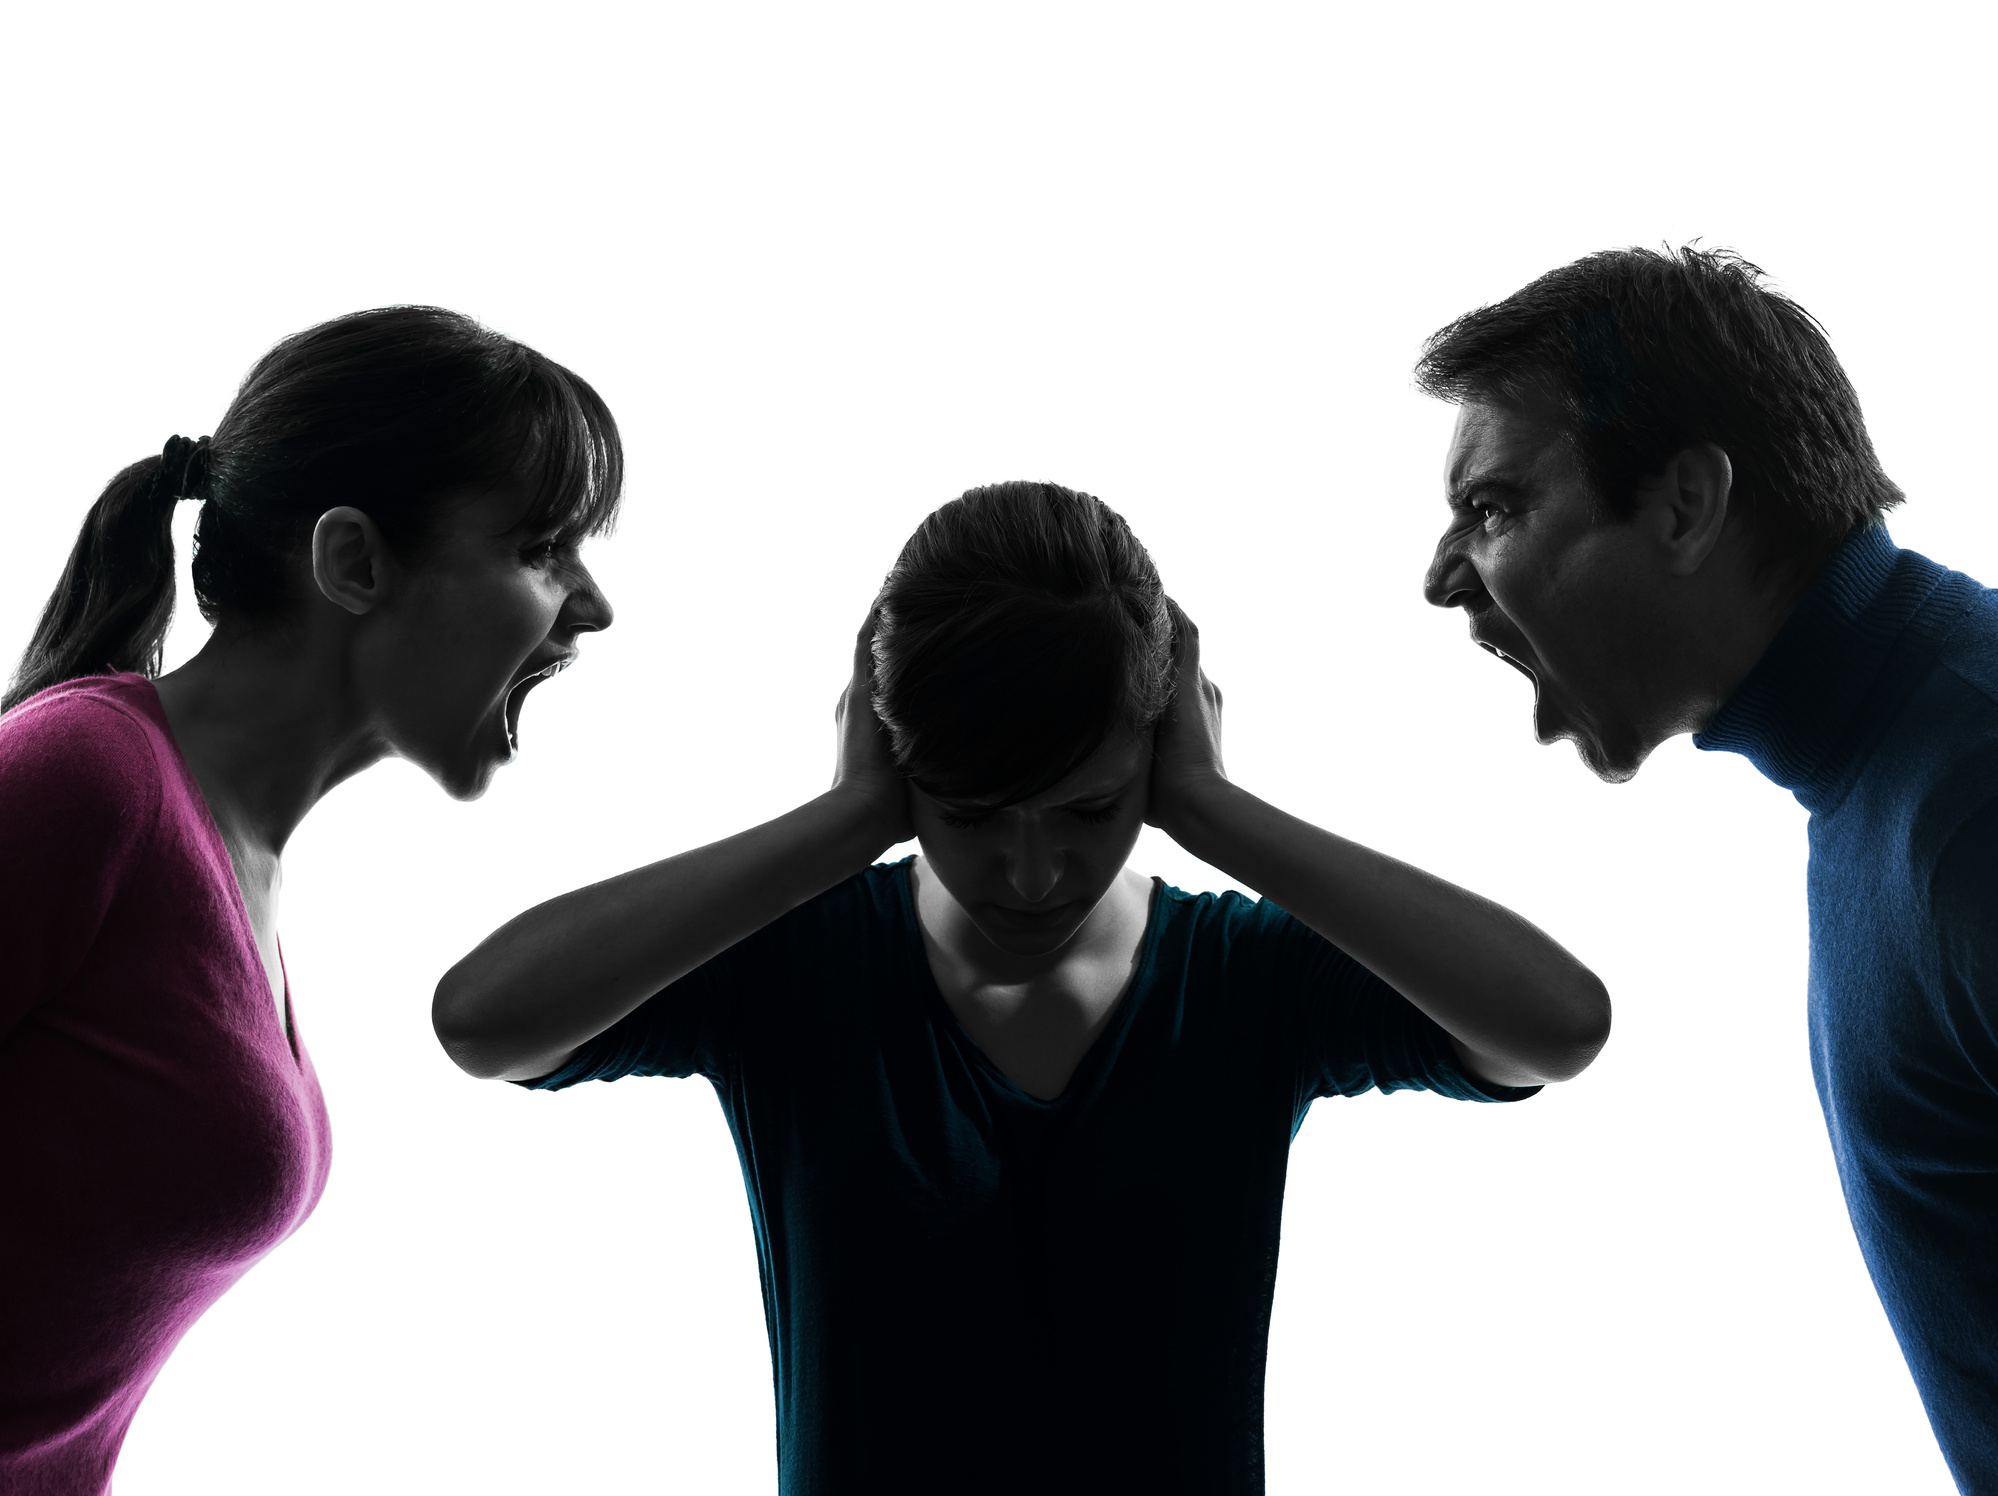 Silhouette of child caught between arguing parents